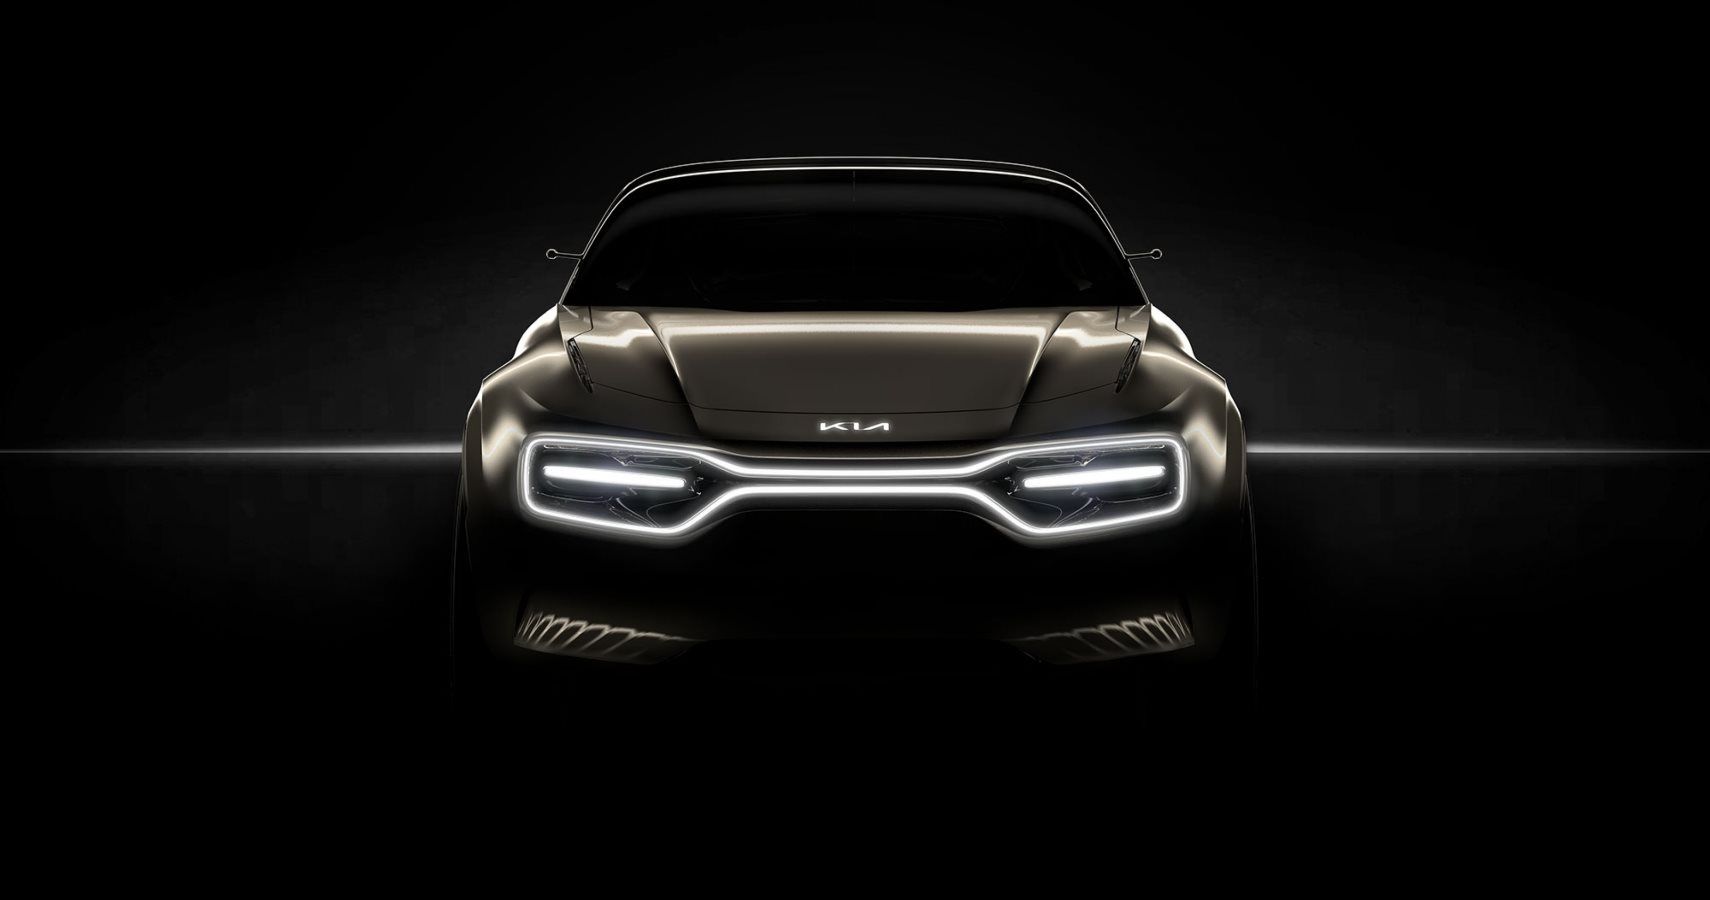 Kia Teases New Electric Concept With Intimidating LED Headlights